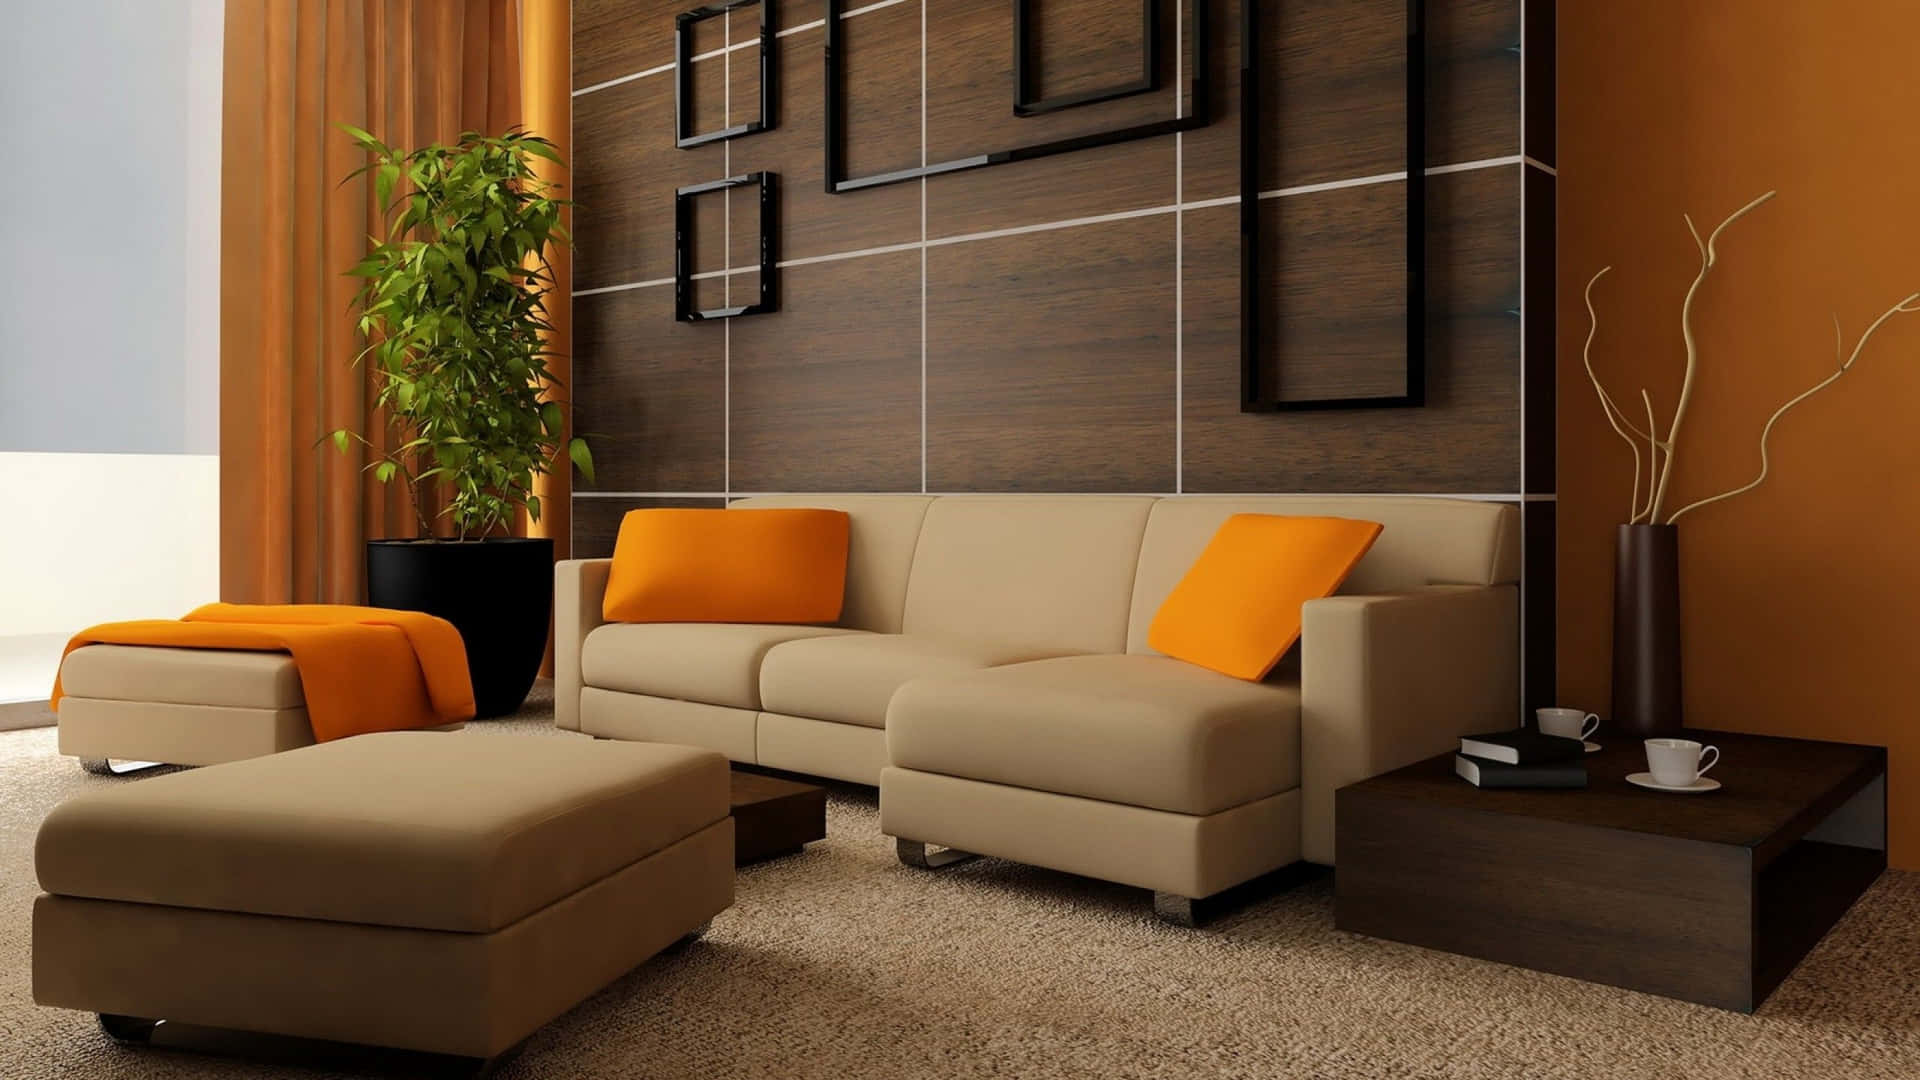 A Living Room With Orange Walls And Furniture